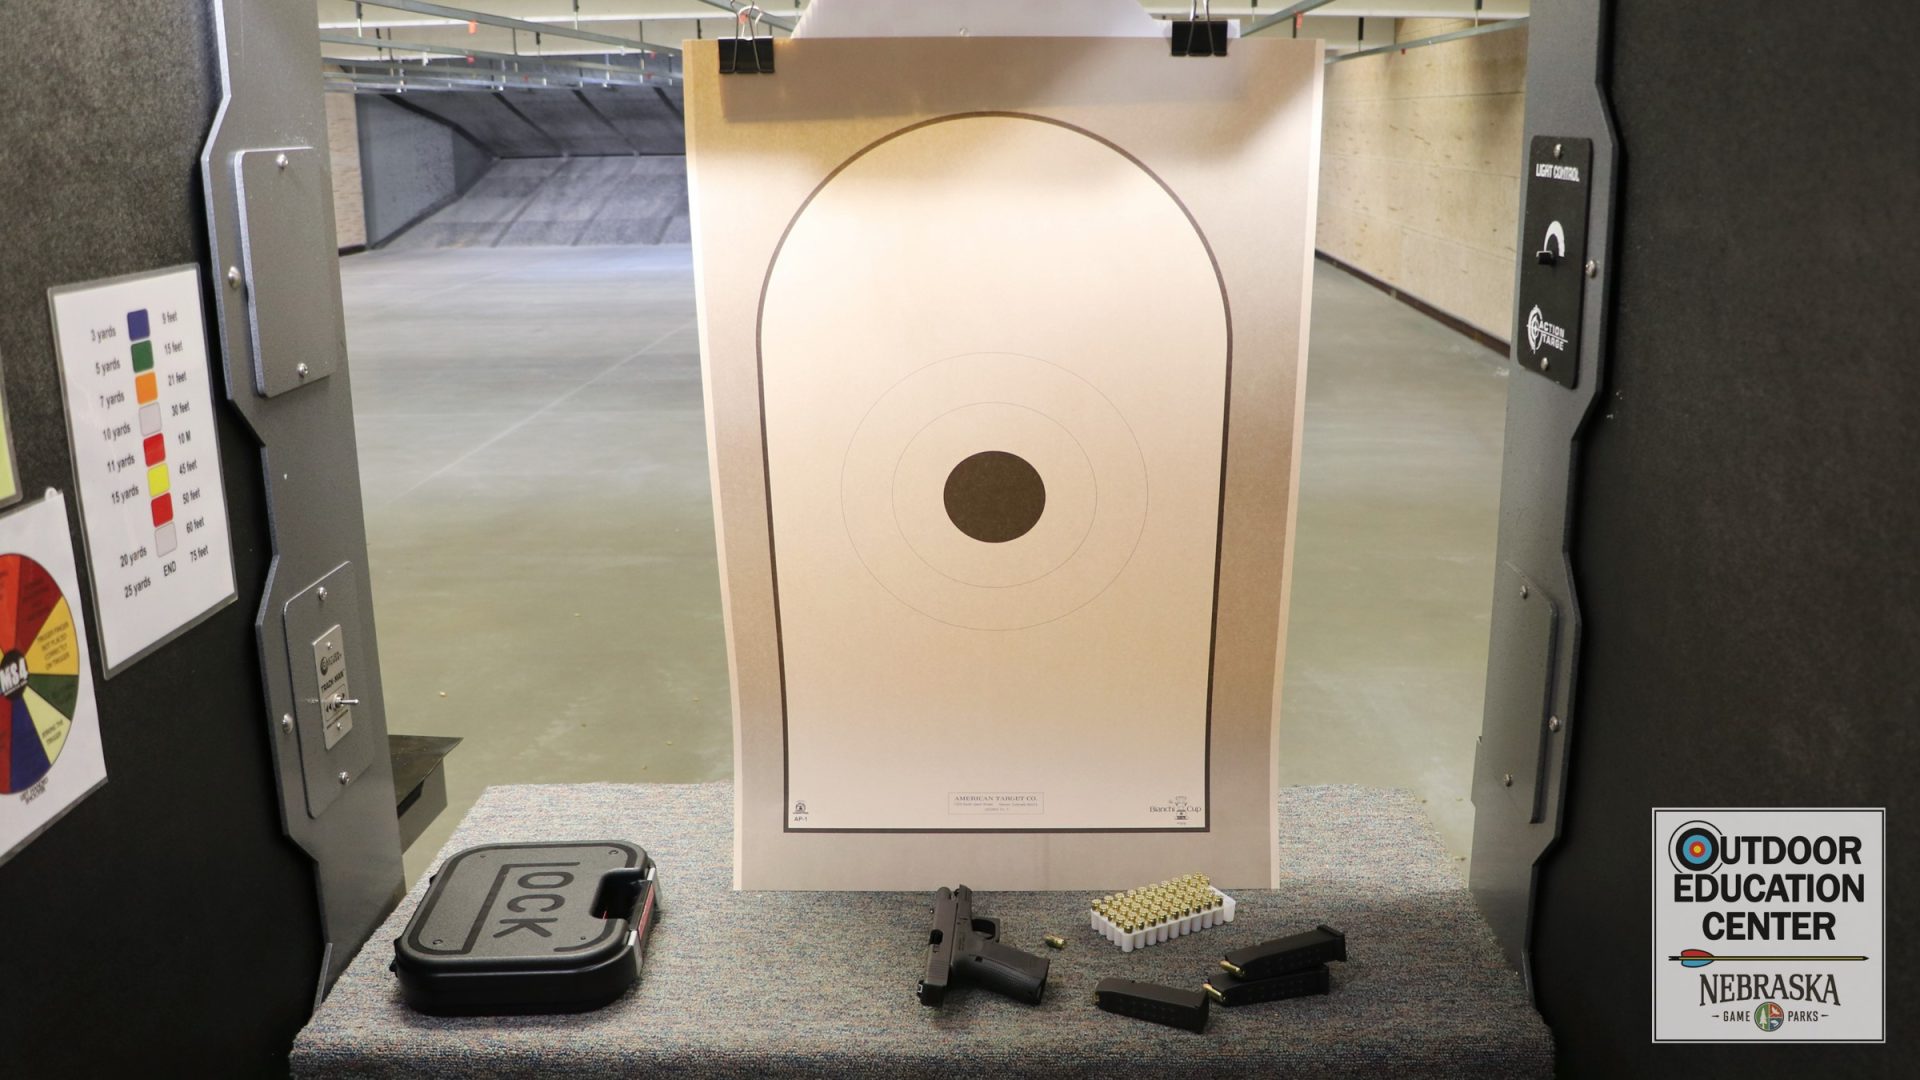 AP-1 target with unloaded pistol on bench